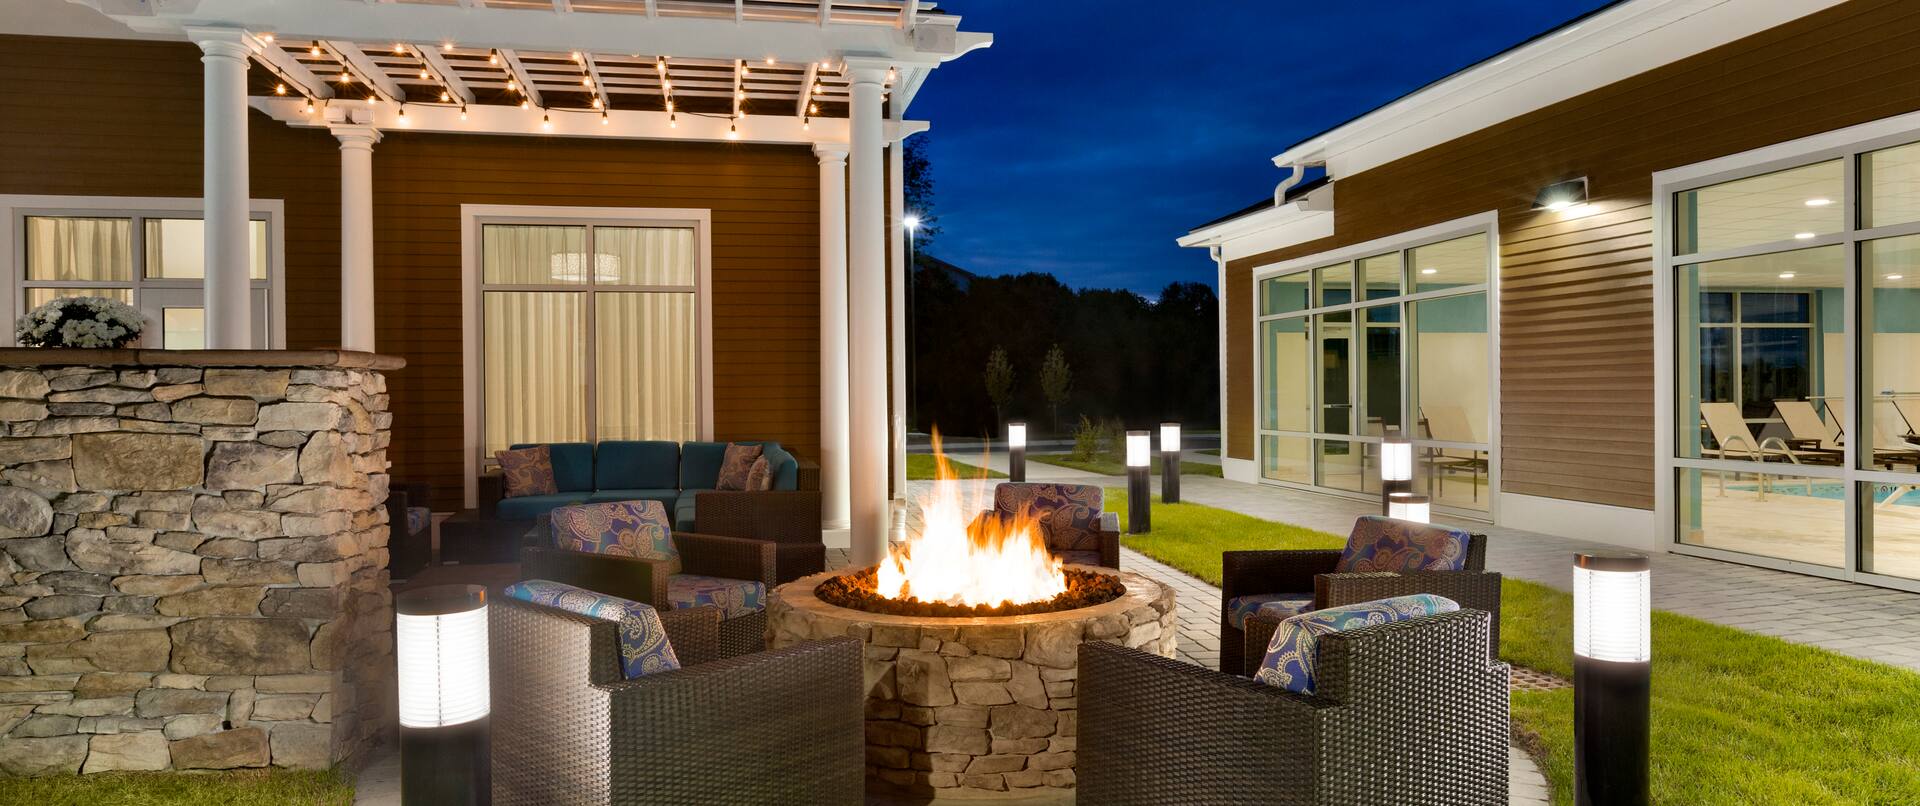 Patio FirePit and Seating